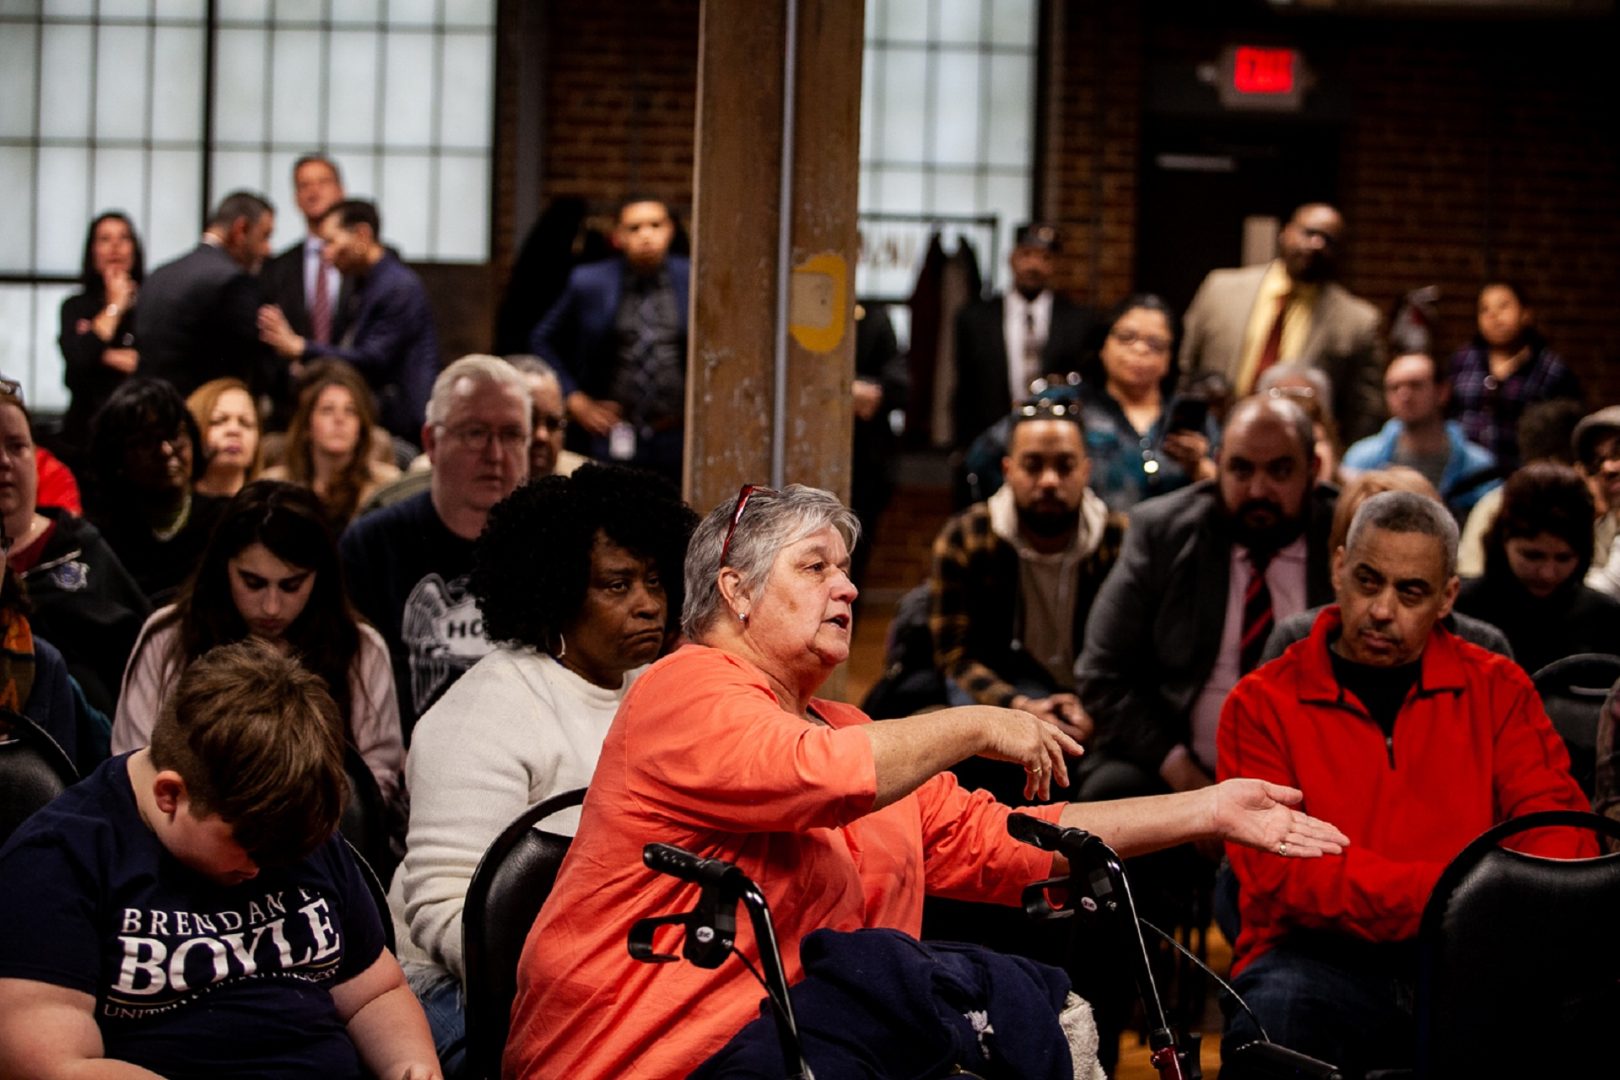 Kensington resident Donna Aument voiced her opposition to a proposed safe injection site at a meeting to update residents on the ongoing Philadelphia Resilience Project's efforts in combating the opioid epidemic.